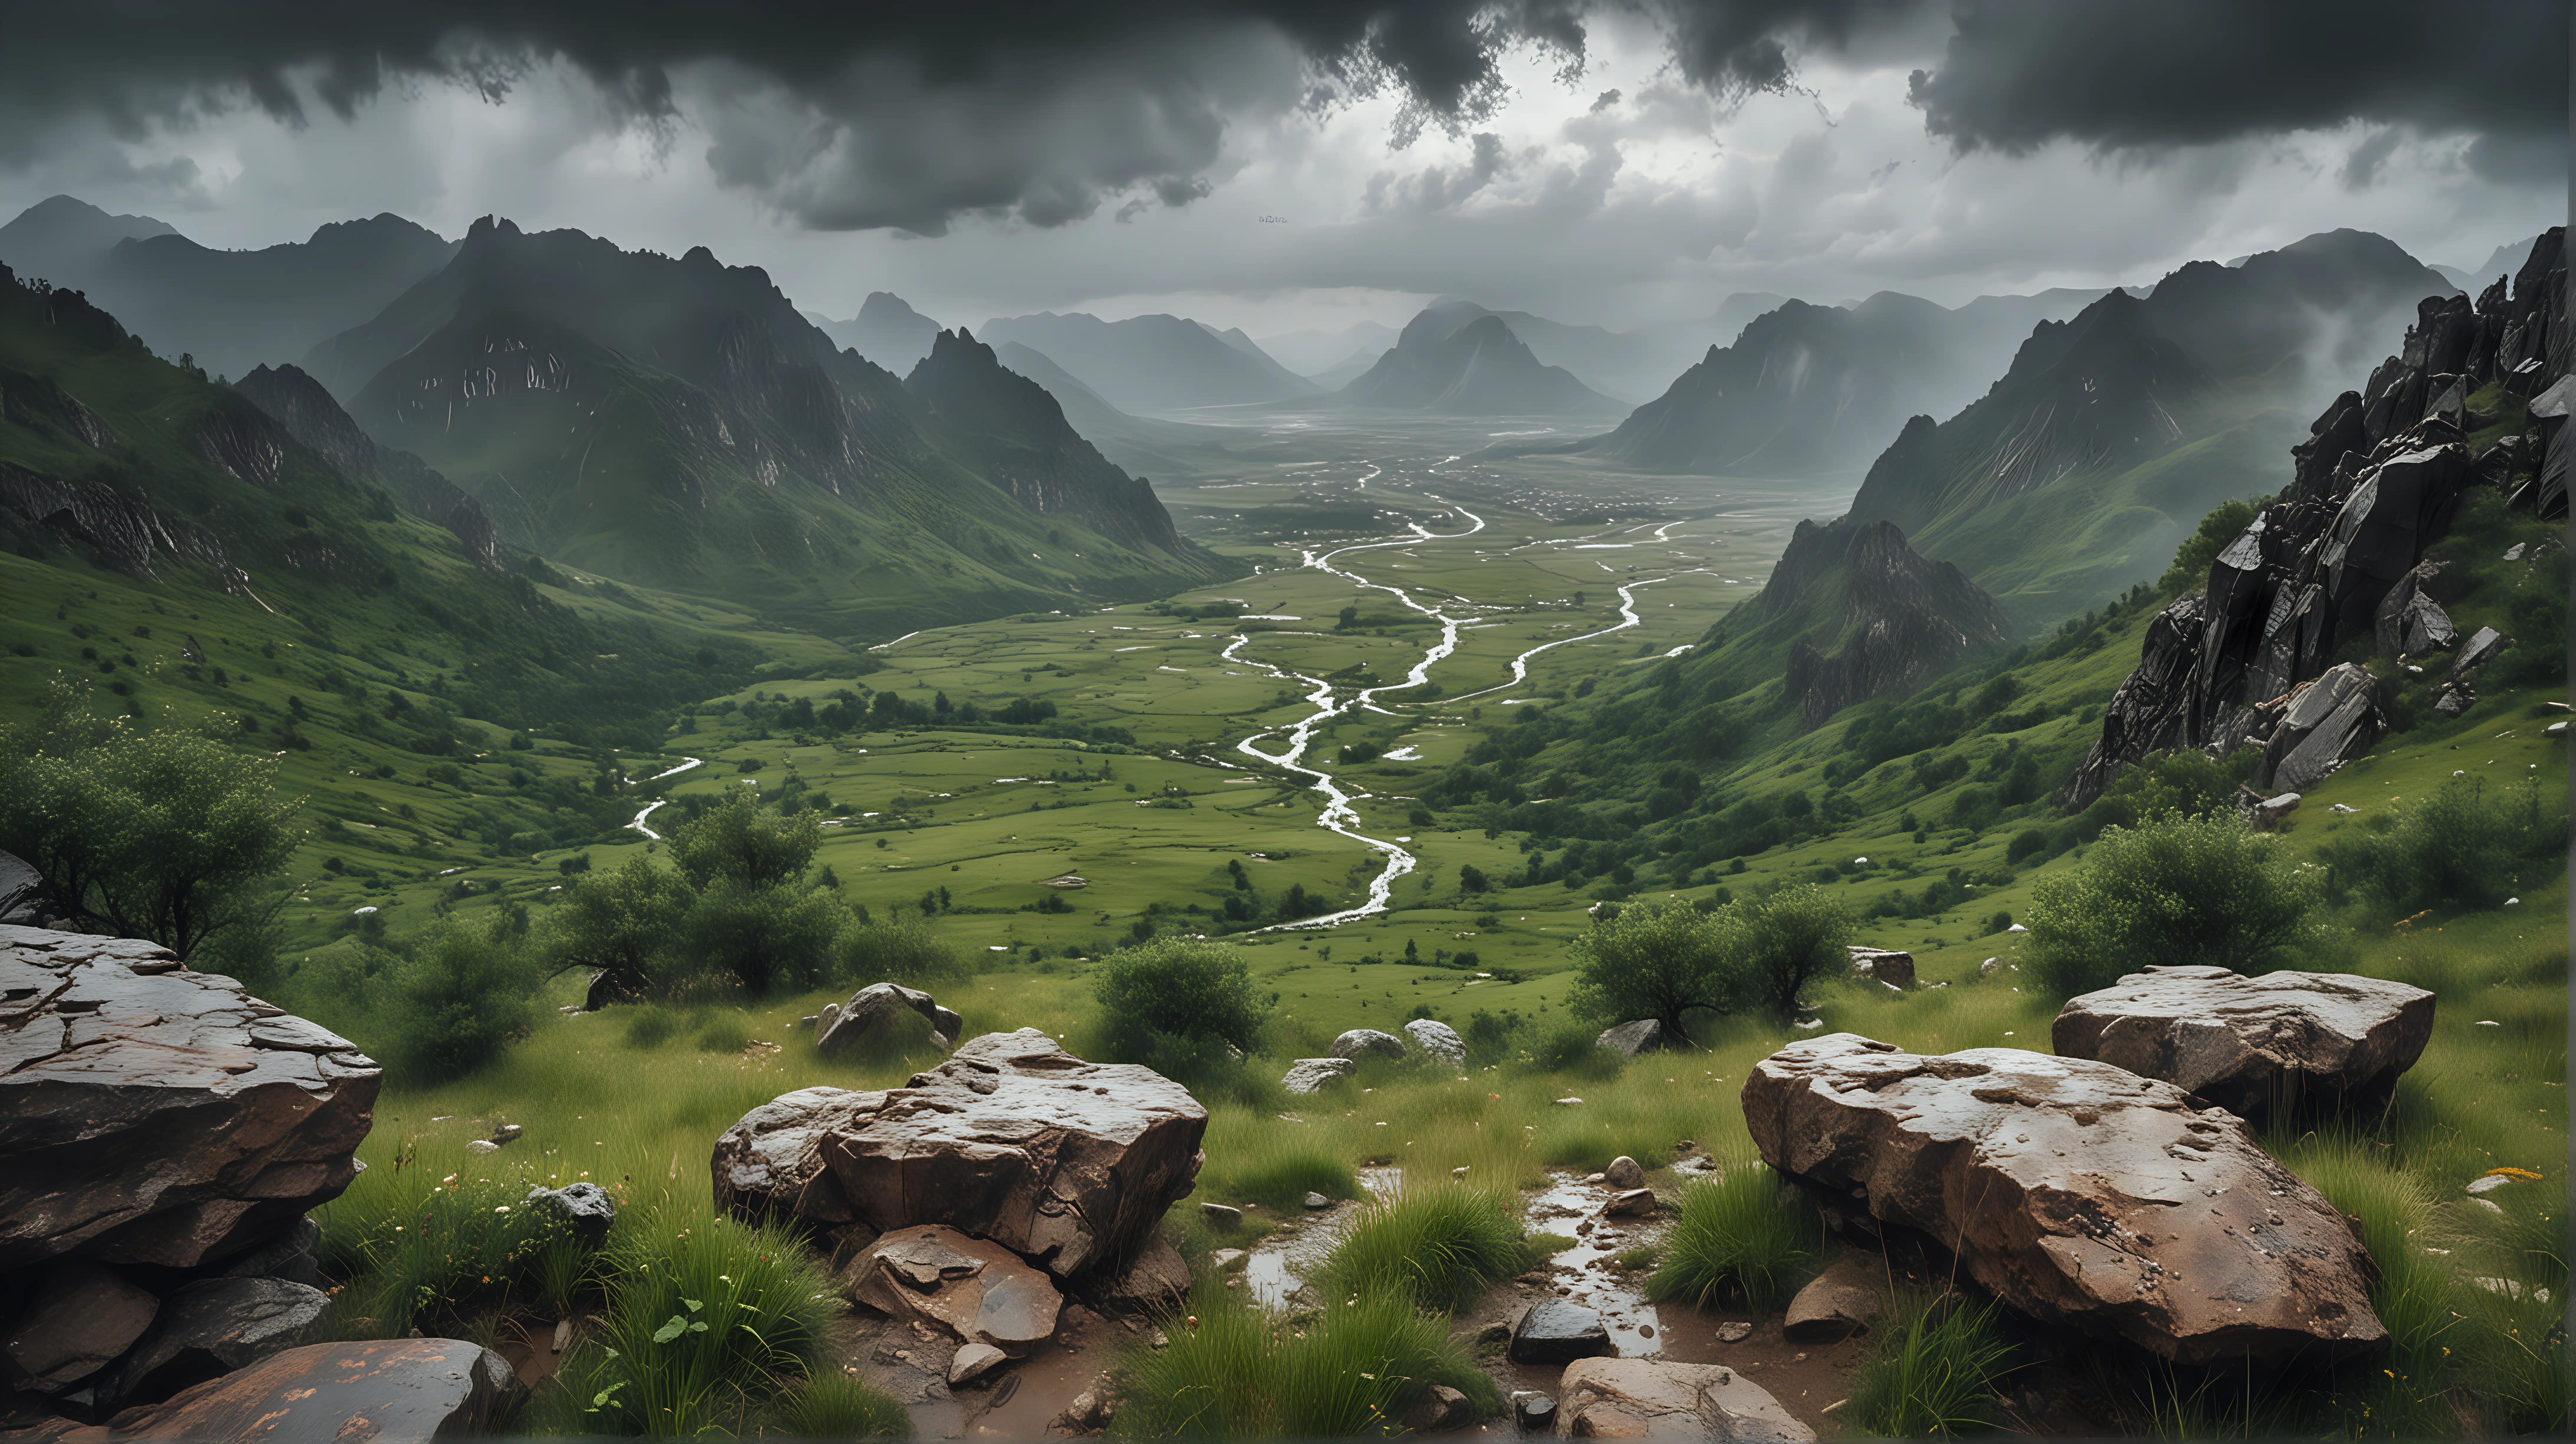 Majestic Valley Landscape Rainy Day Between Two Mountain Ranges